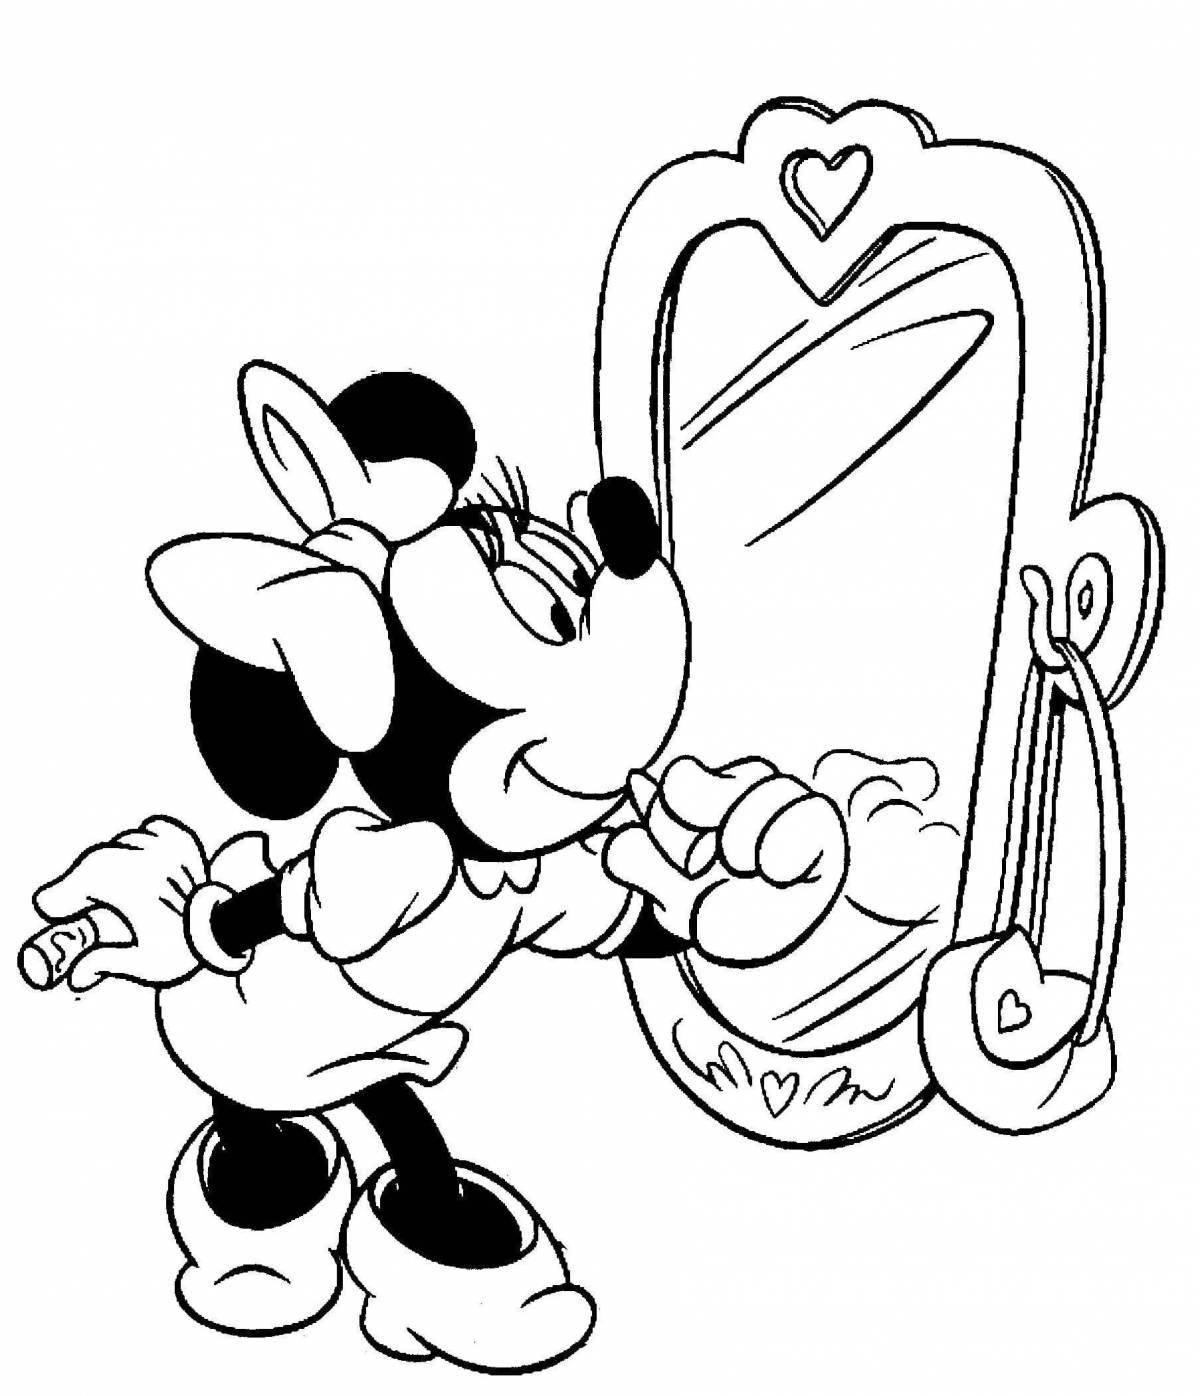 Mickey mouse for kids #11